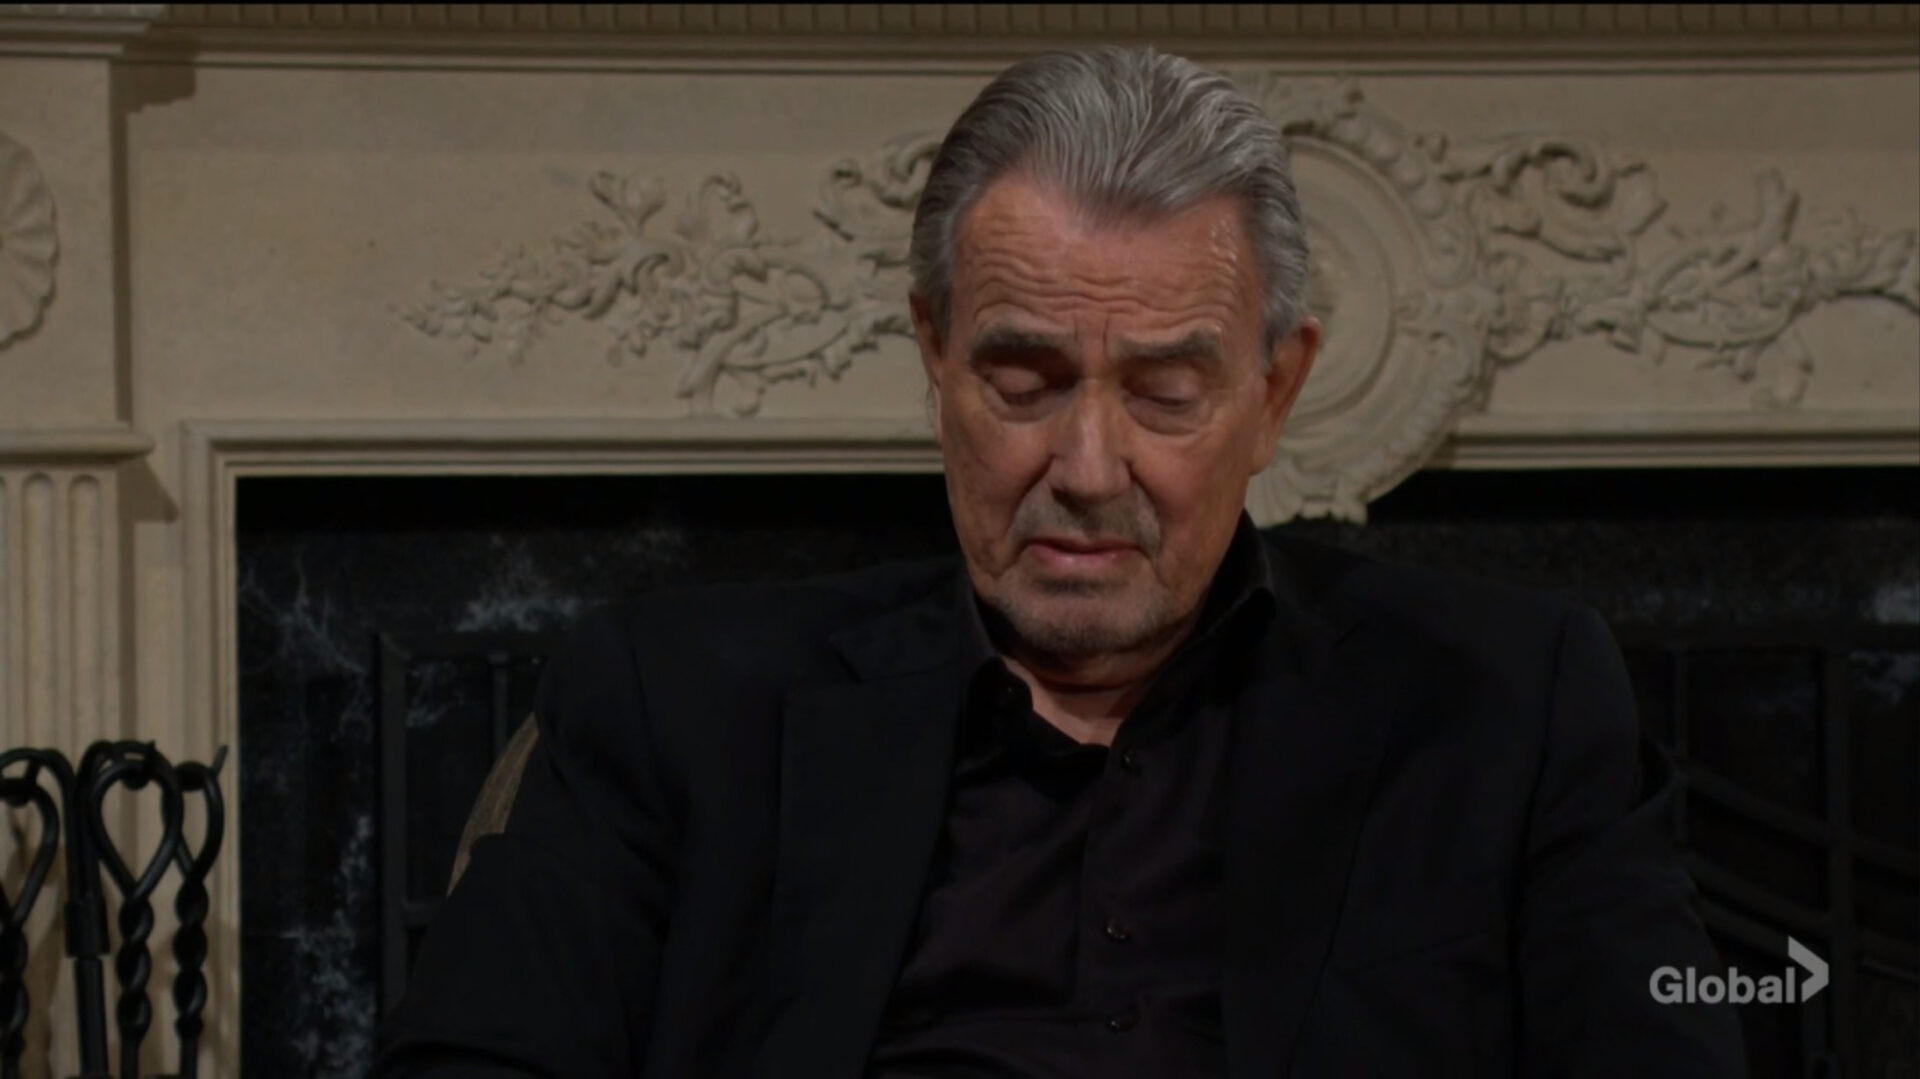 victor sad about dumping adam at newman